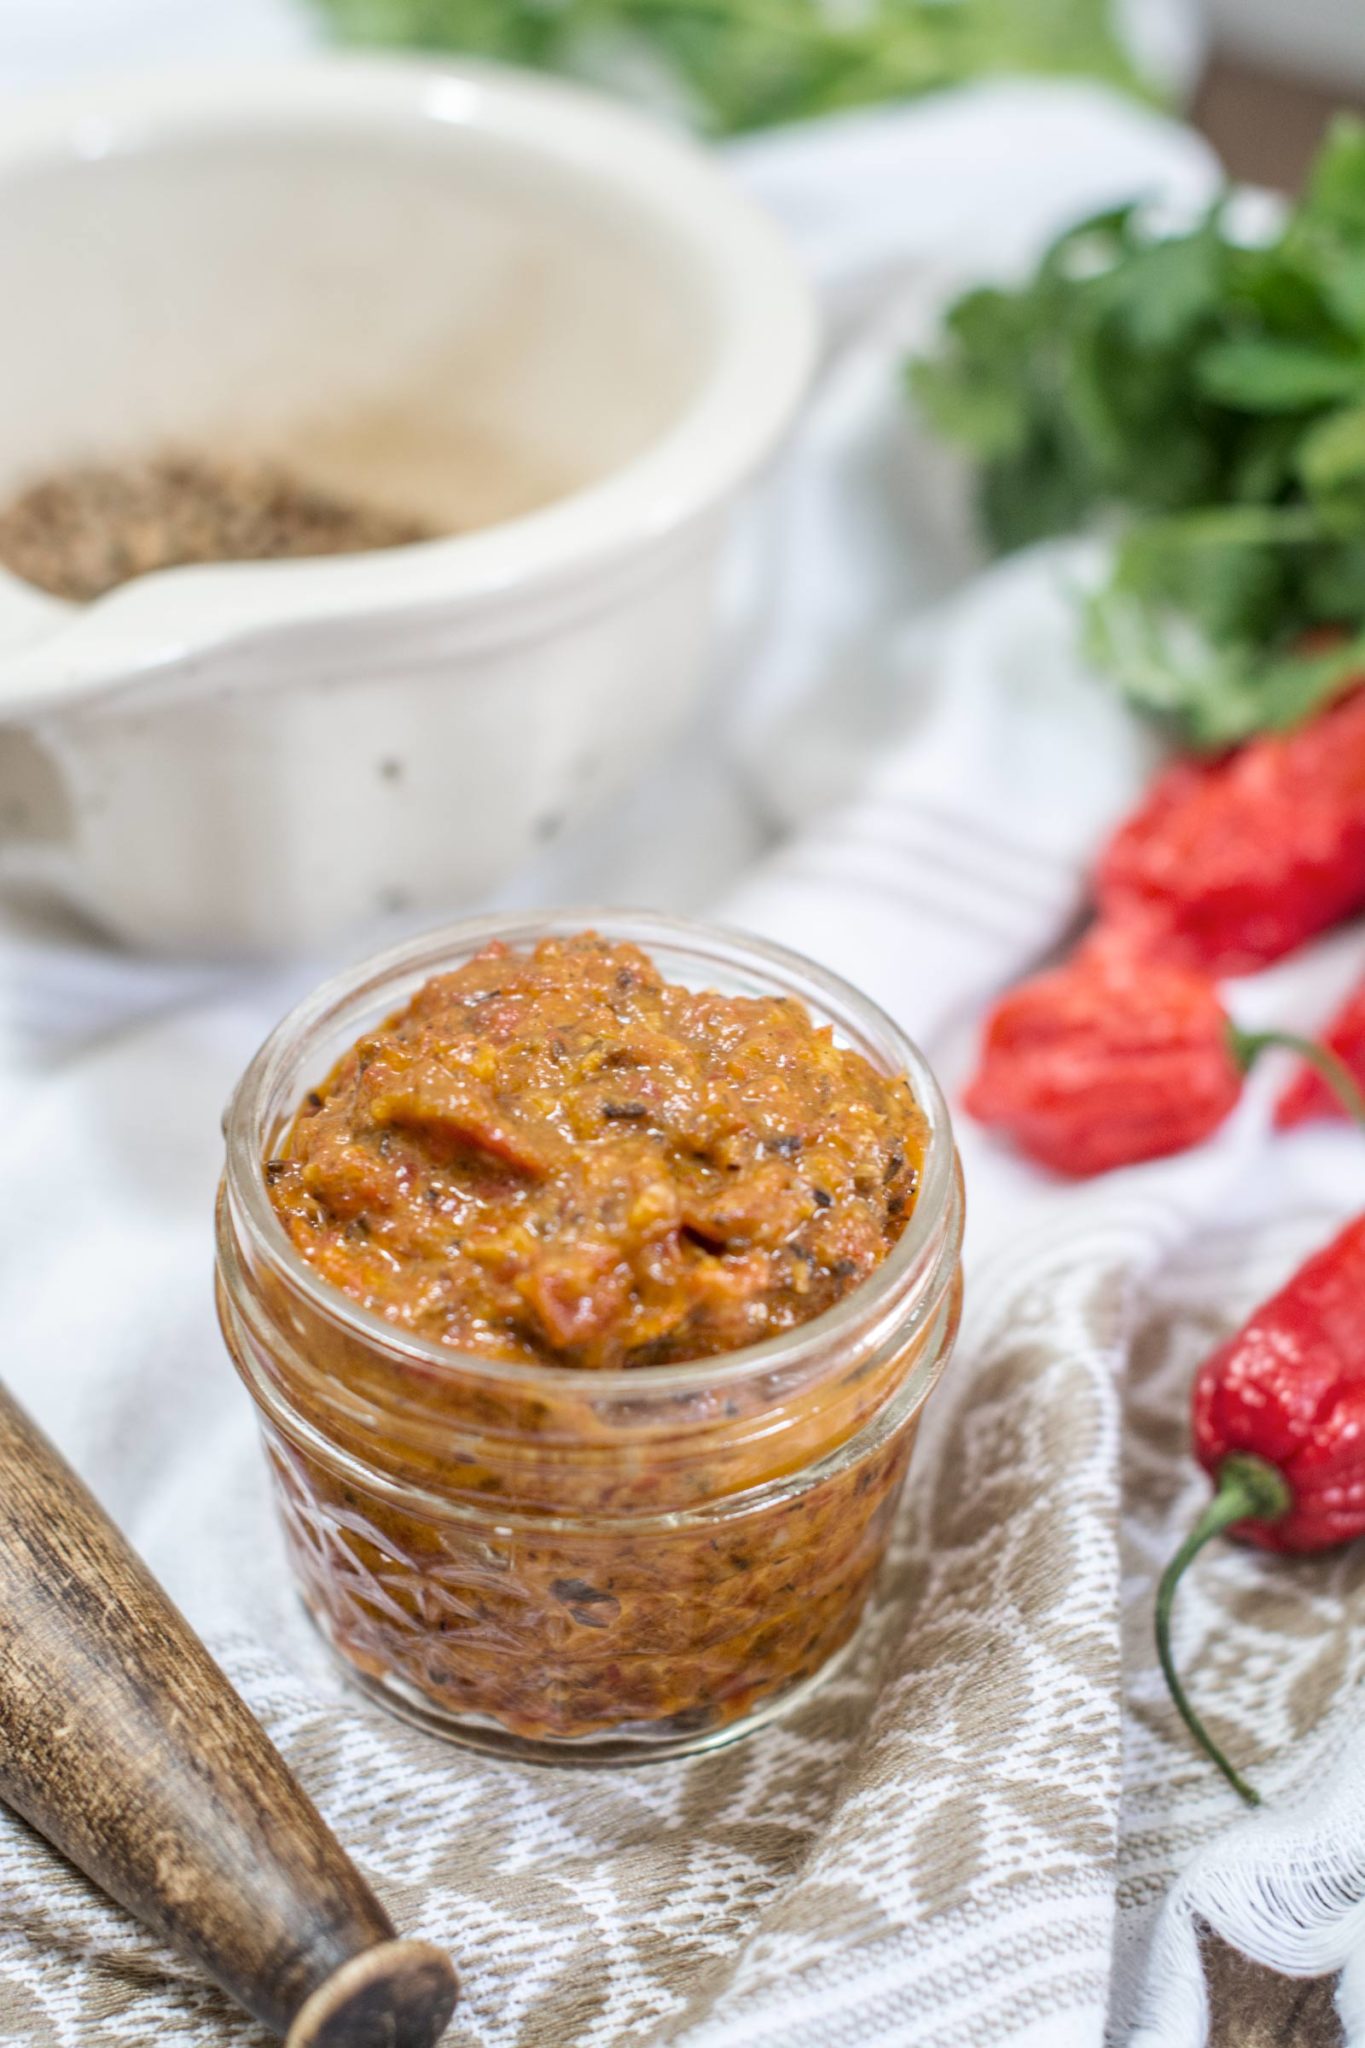 Try making this spicy and gorgeous flavored Harissa Paste, that is great used as a marinade, added to soups and stews or as a dipping sauce on the side when you need an extra bit of heat added. Find the Recipe at Little Figgy Food.